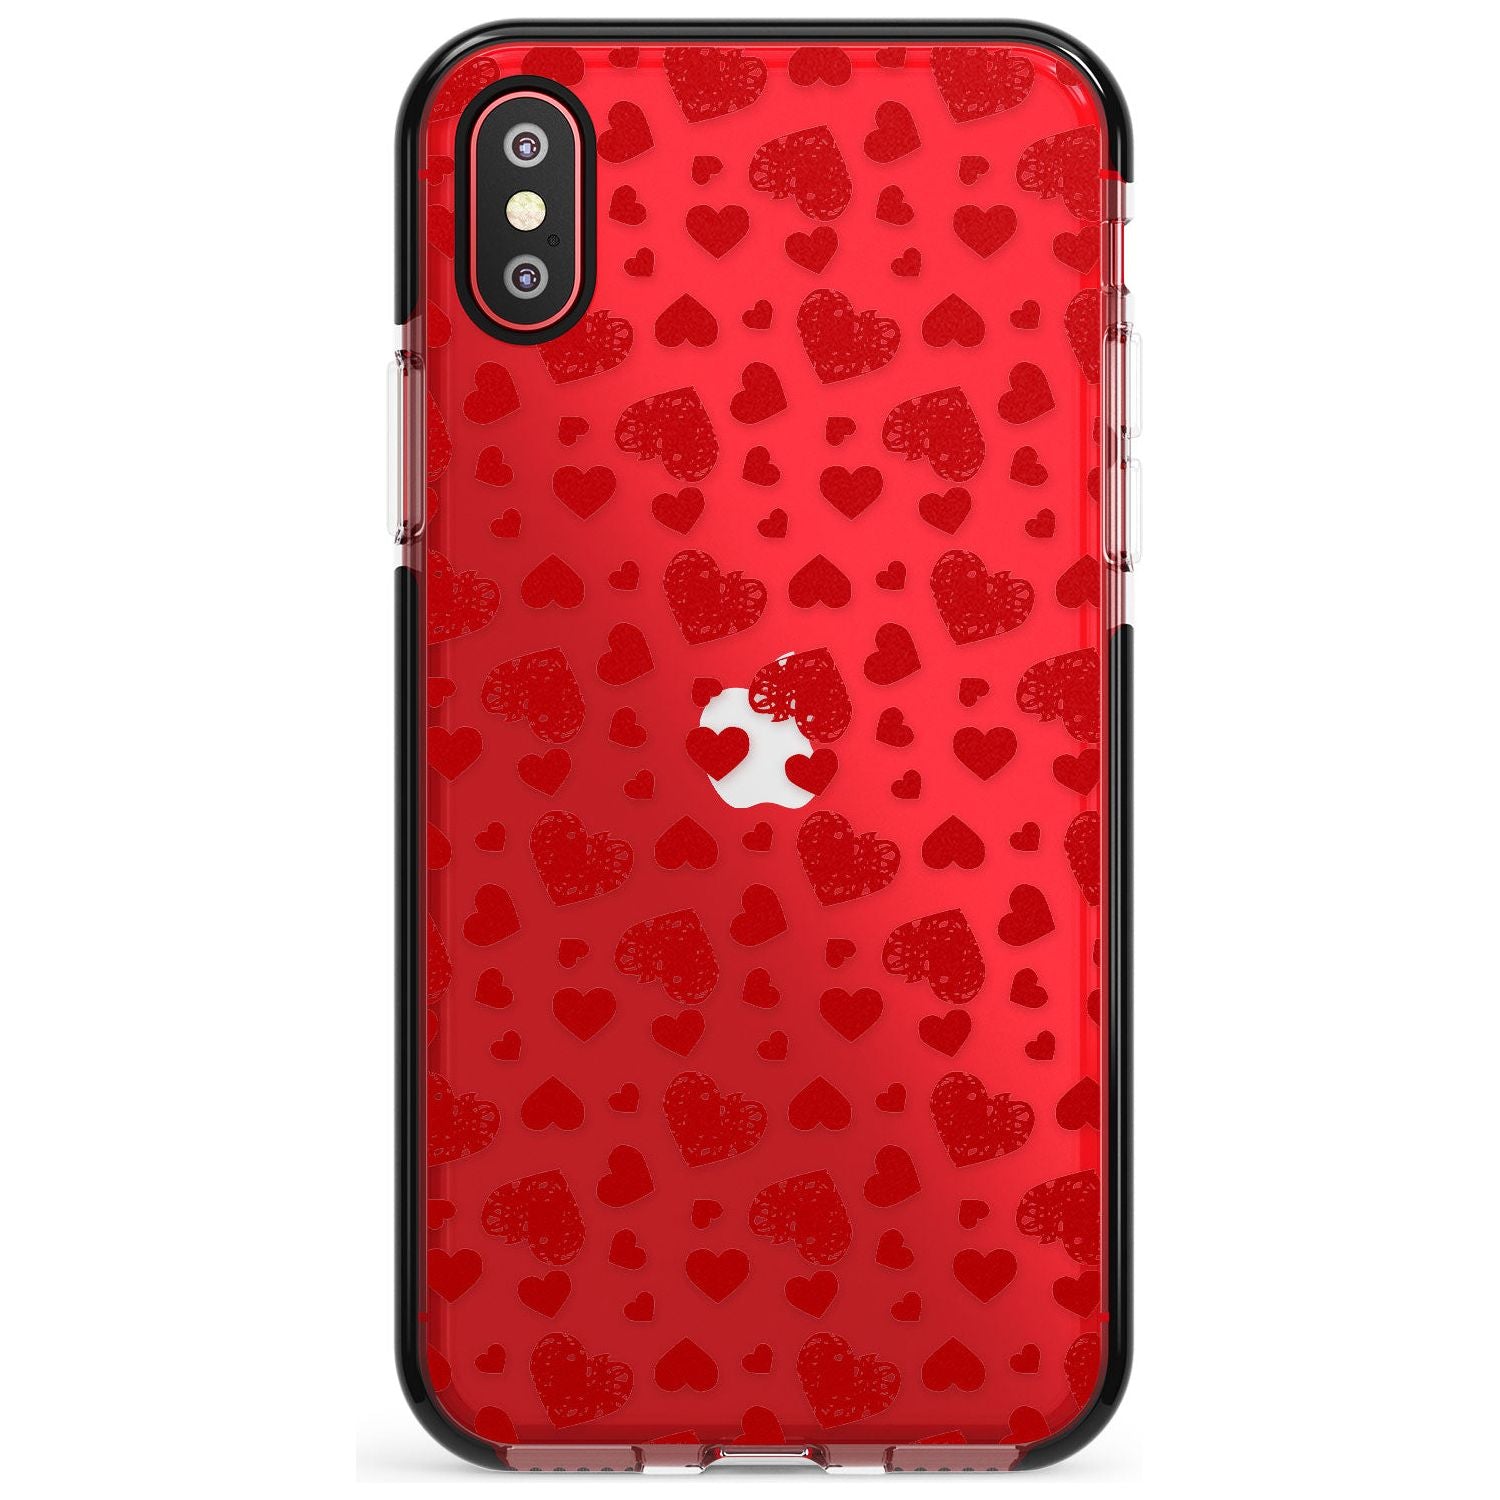 Sketched Heart Pattern Pink Fade Impact Phone Case for iPhone X XS Max XR